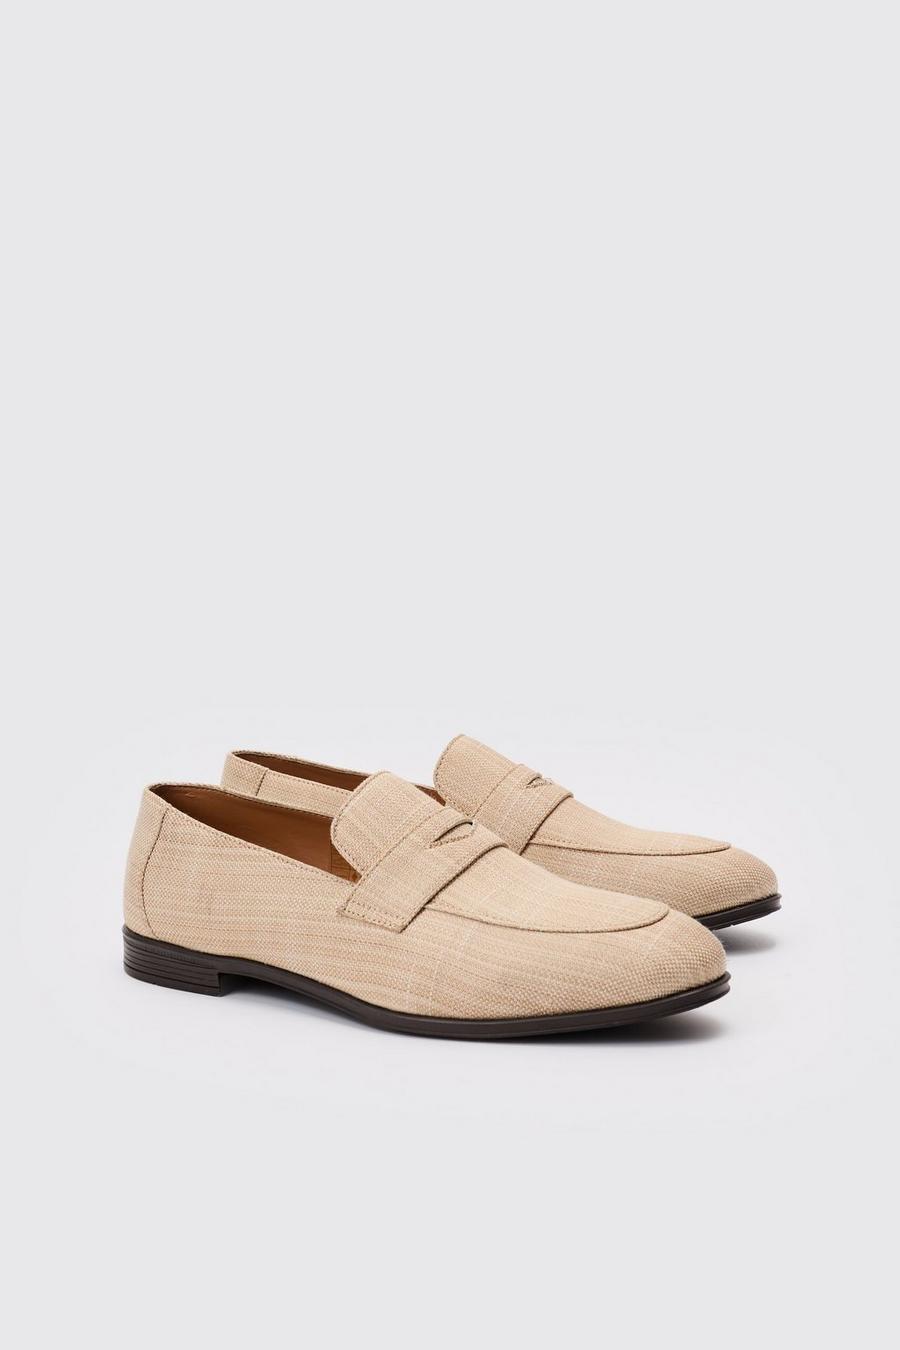 Stone Linen Look Loafer